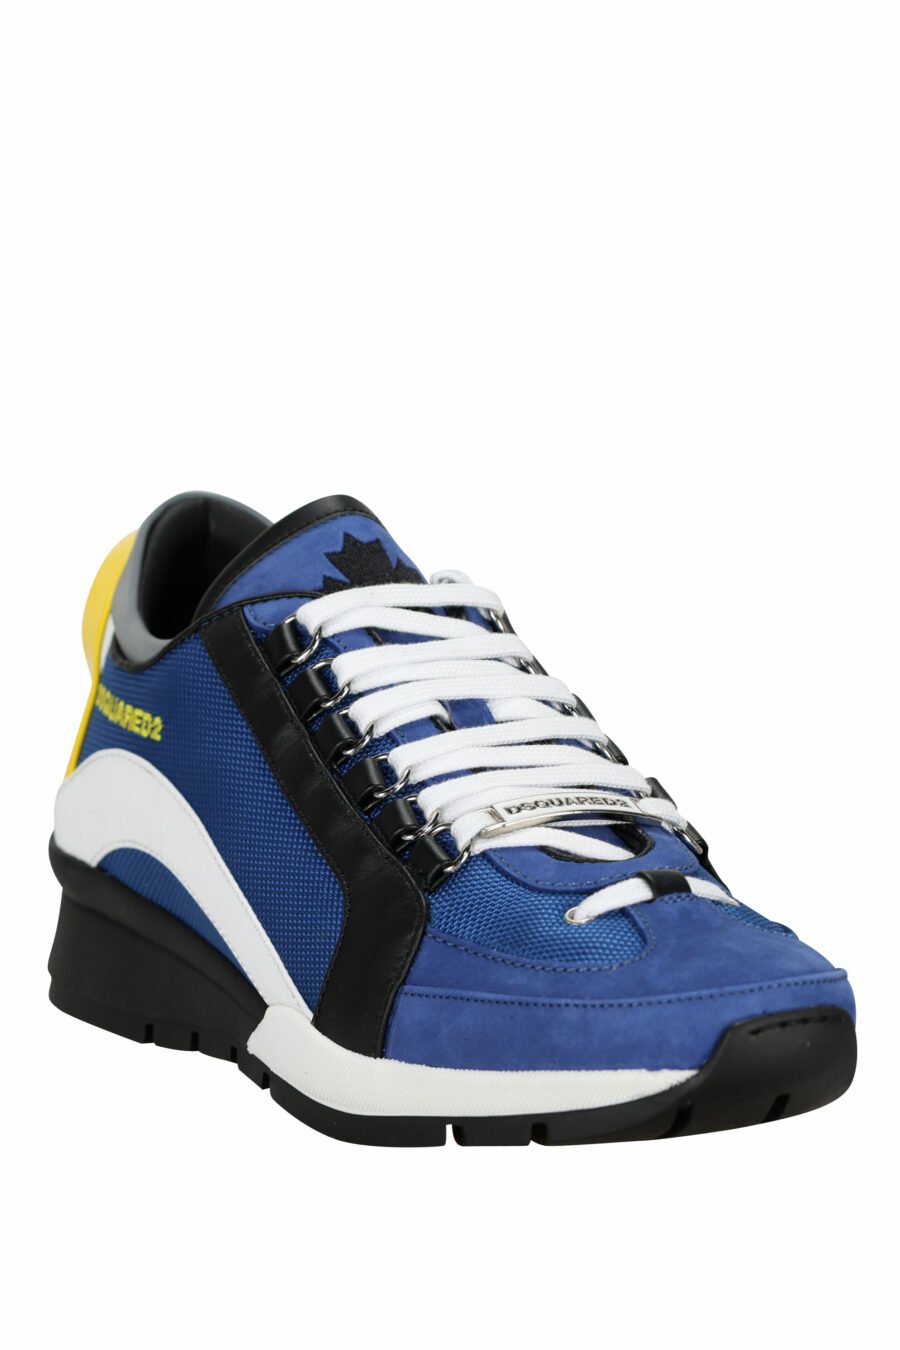 Blue trainers "legendary" with yellow detail - 8055777300343 1